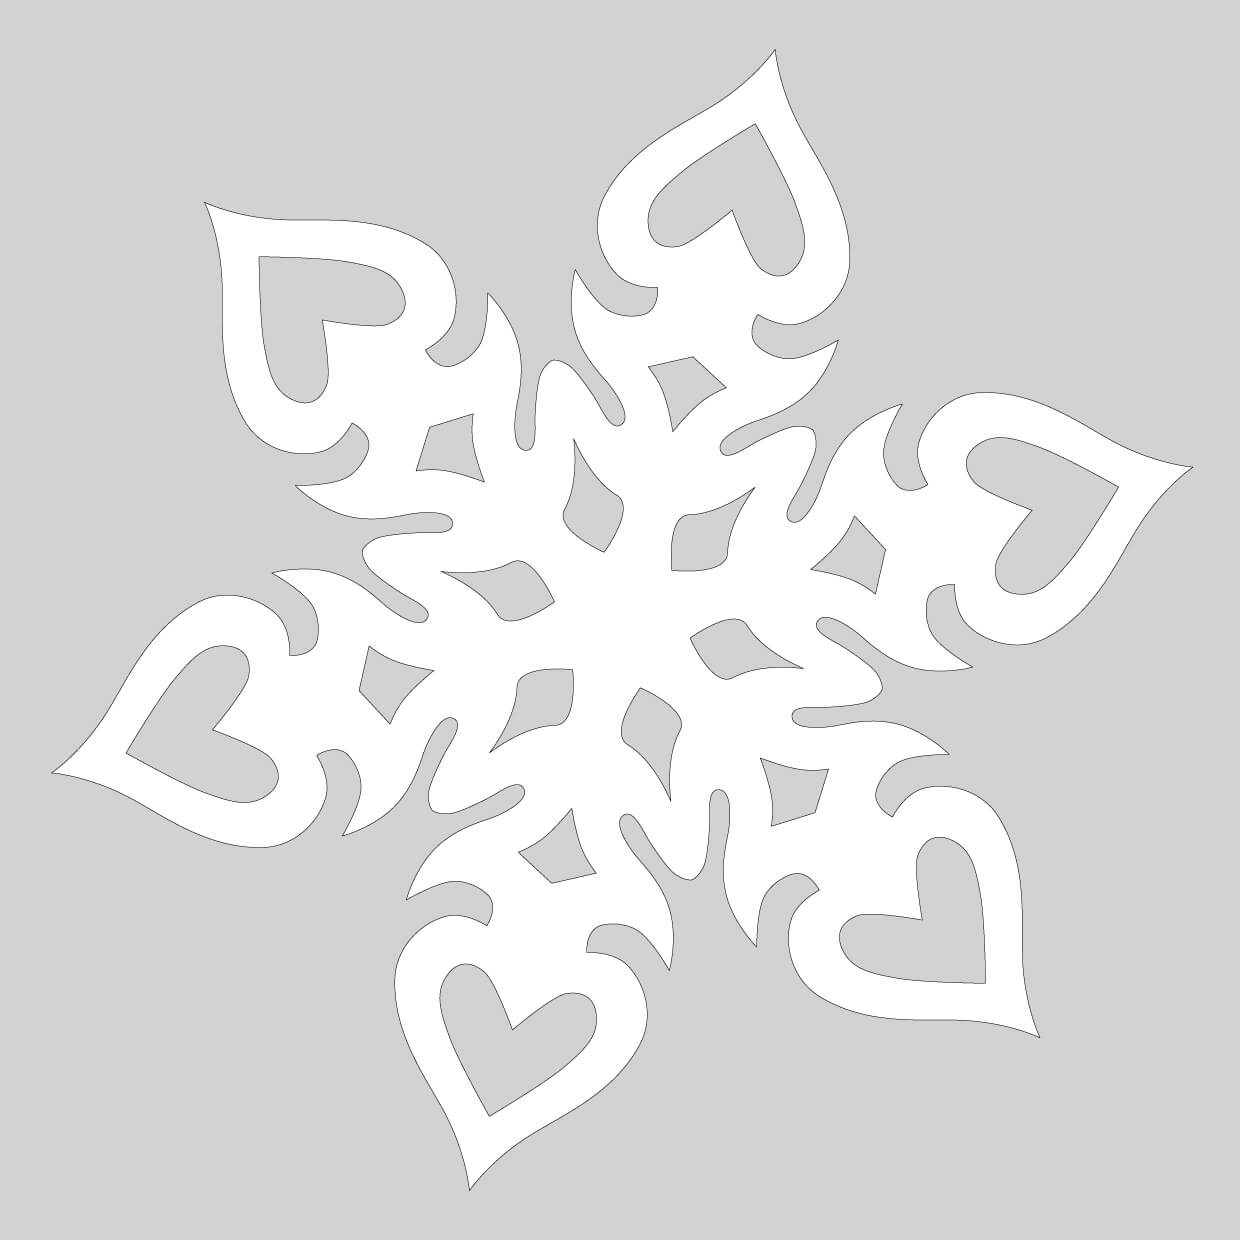 Heart Shaped Paper Snowflake Pattern To Cut Out | Free Printable - Free Printable Snowflake Patterns